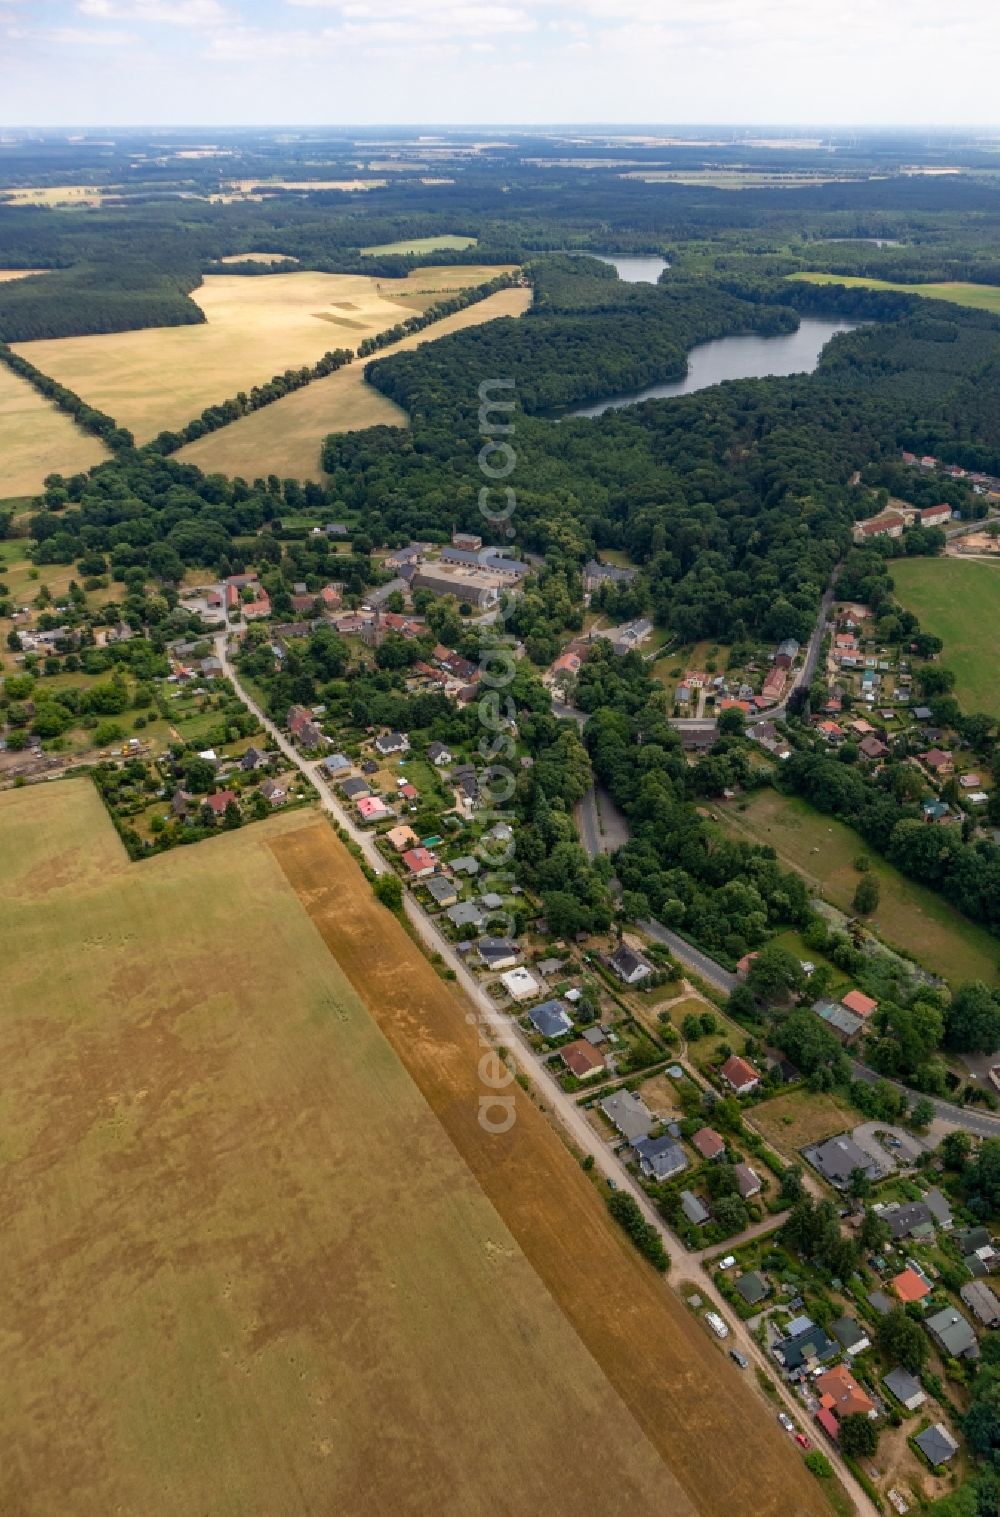 Wandlitz from above - Village on the banks of the area lake in Wandlitz in the state Brandenburg, Germany